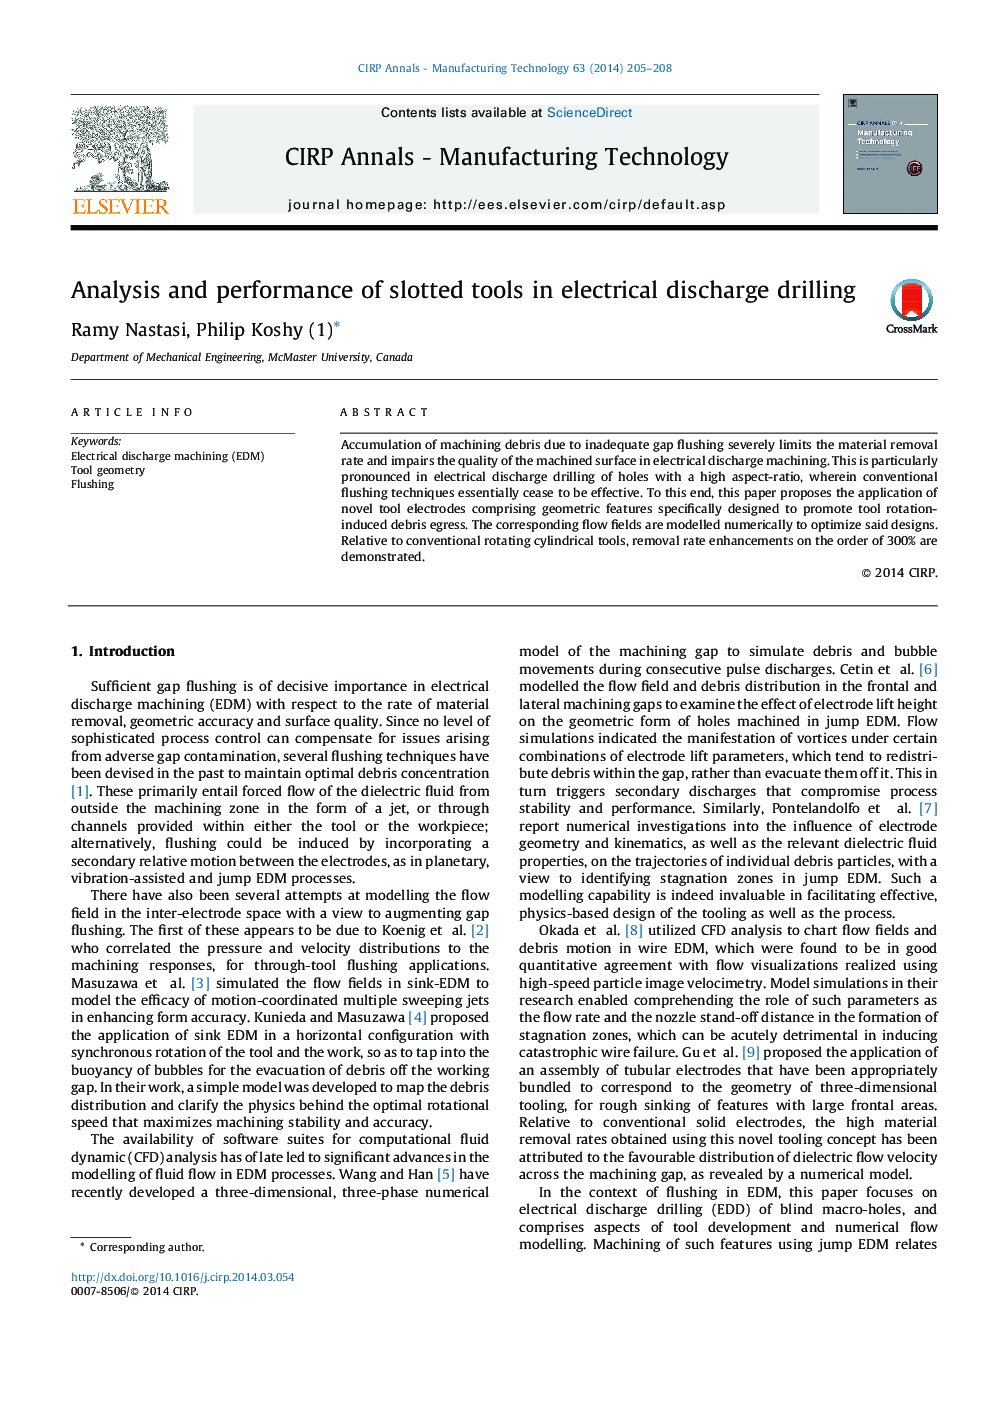 Analysis and performance of slotted tools in electrical discharge drilling